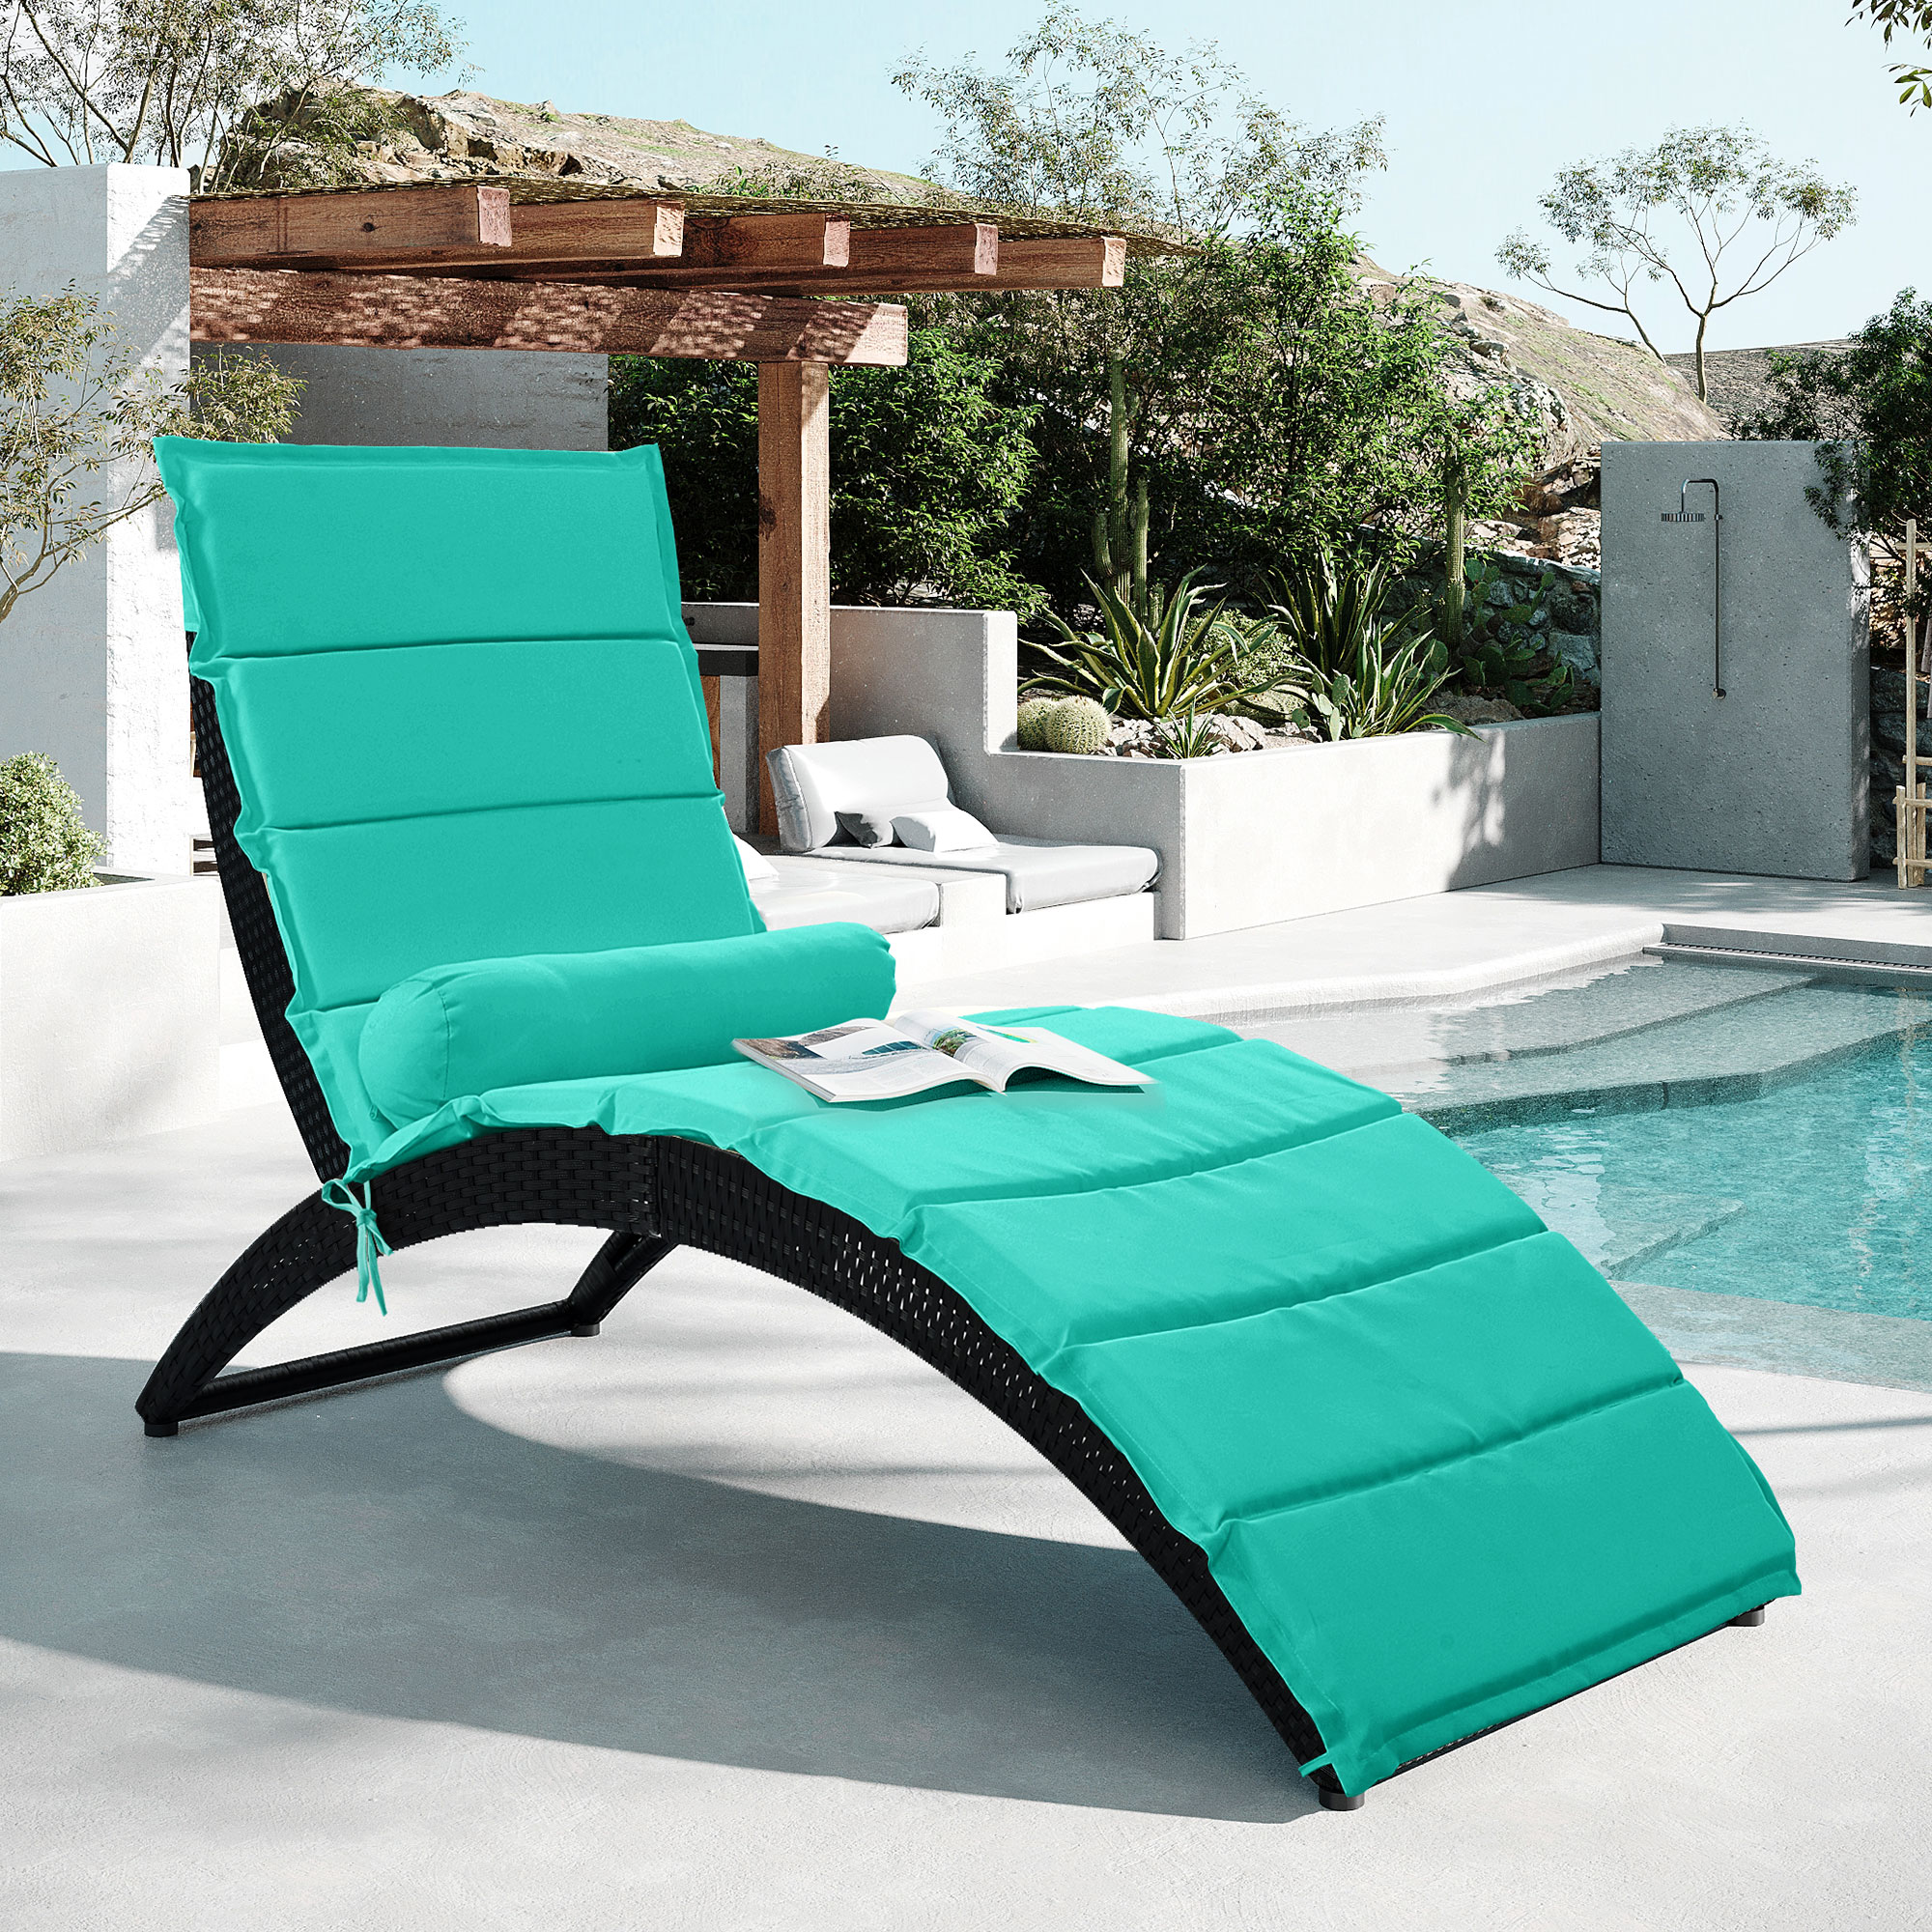 Chaise Lounge Chair for Outside, SYNGAR PE Wicker Foldable Reclining Chair, Patio Sun Lounger with Removable Cushions, Rattan Chaise Chair for Poolside, Garden, Backyard, Greenish-blue, D8584 - image 2 of 11